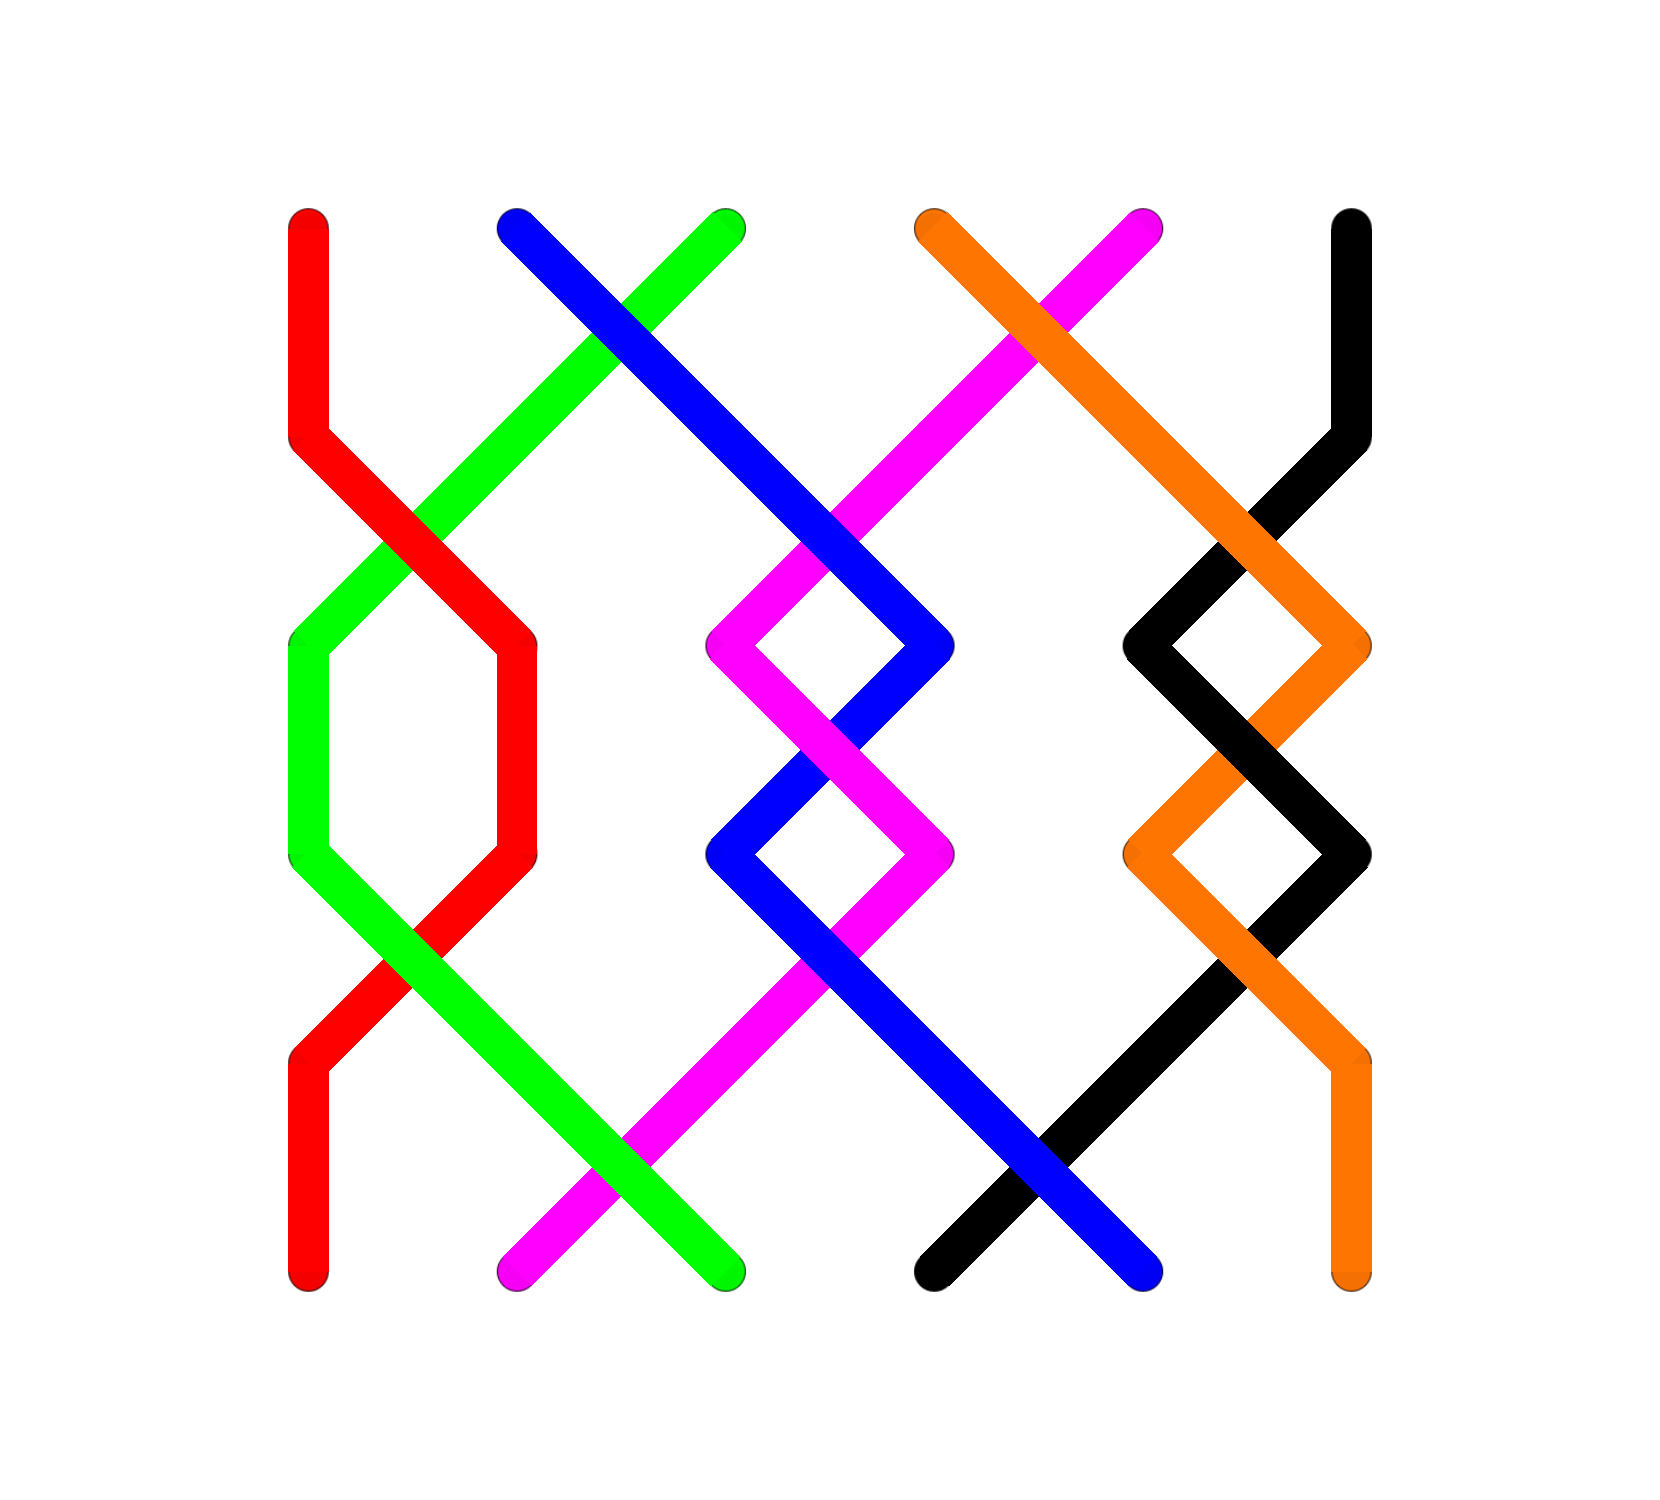 Place_notation_x12.png